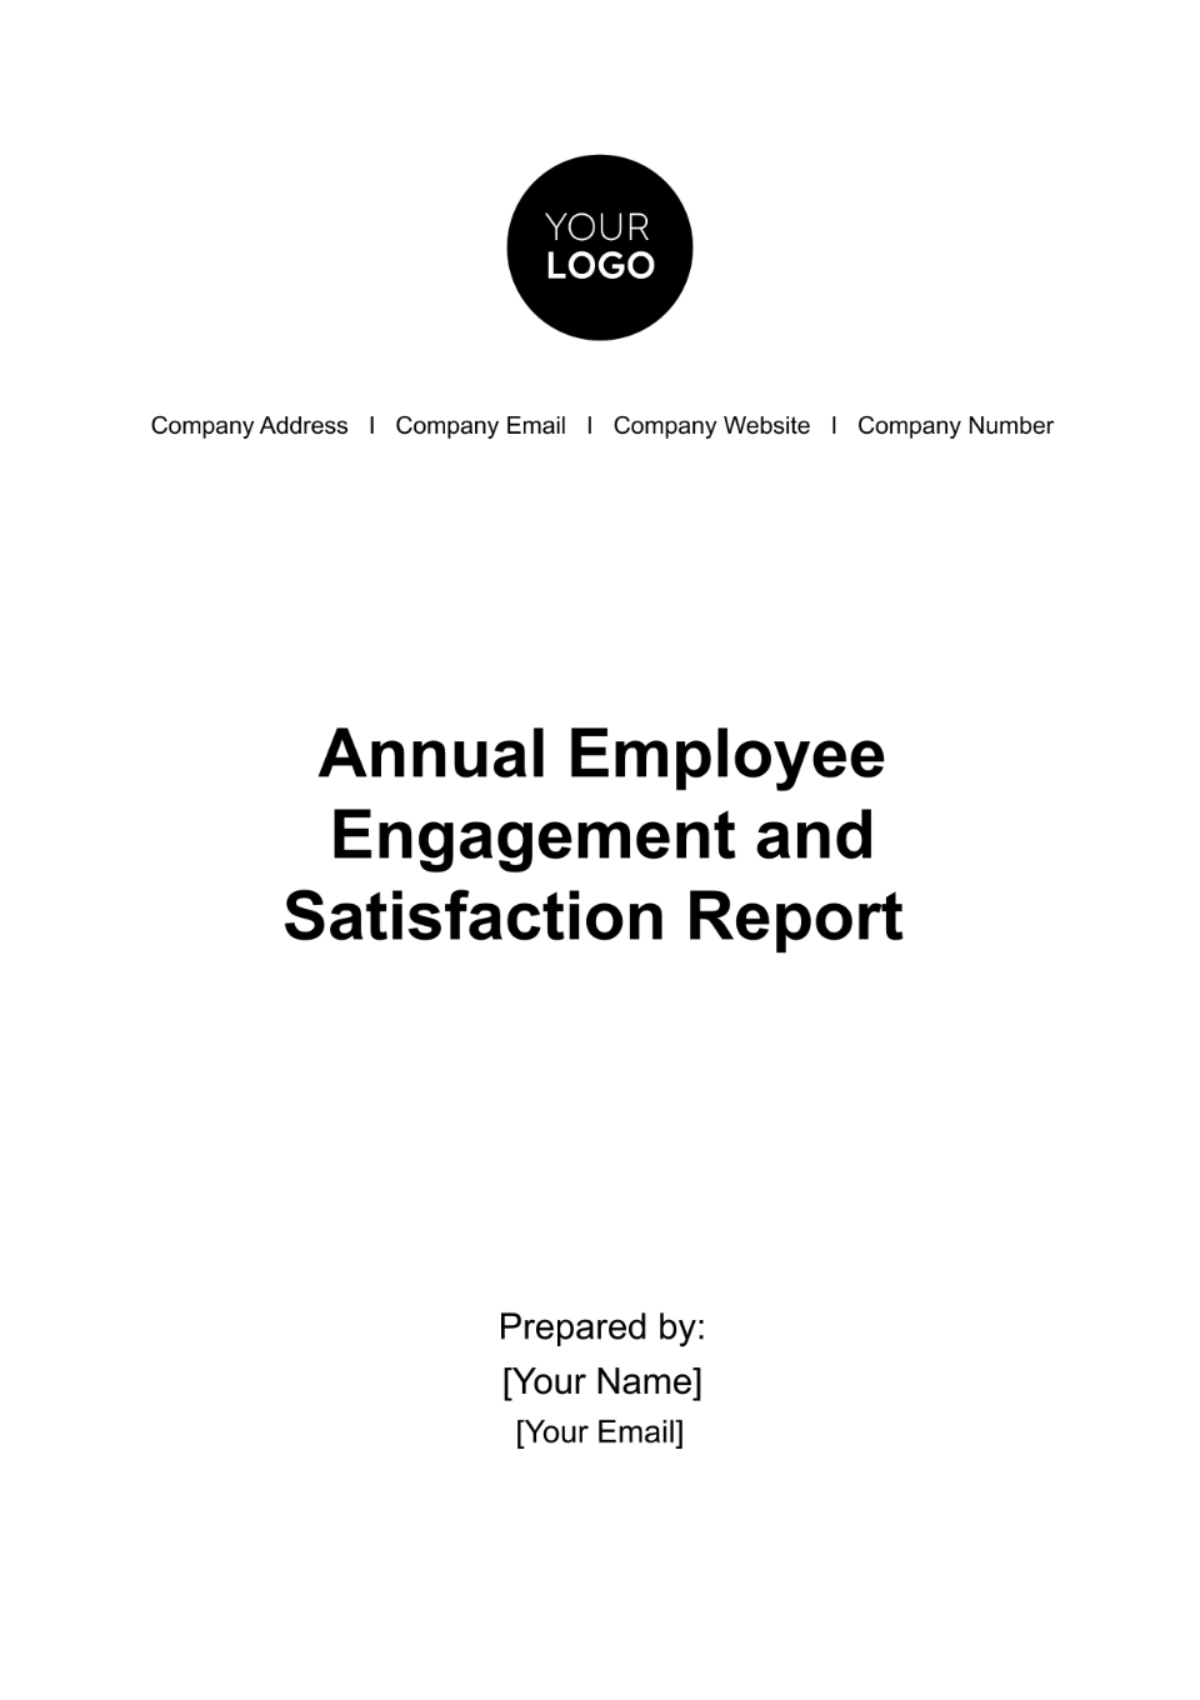 Annual Employee Engagement and Satisfaction Report HR Template